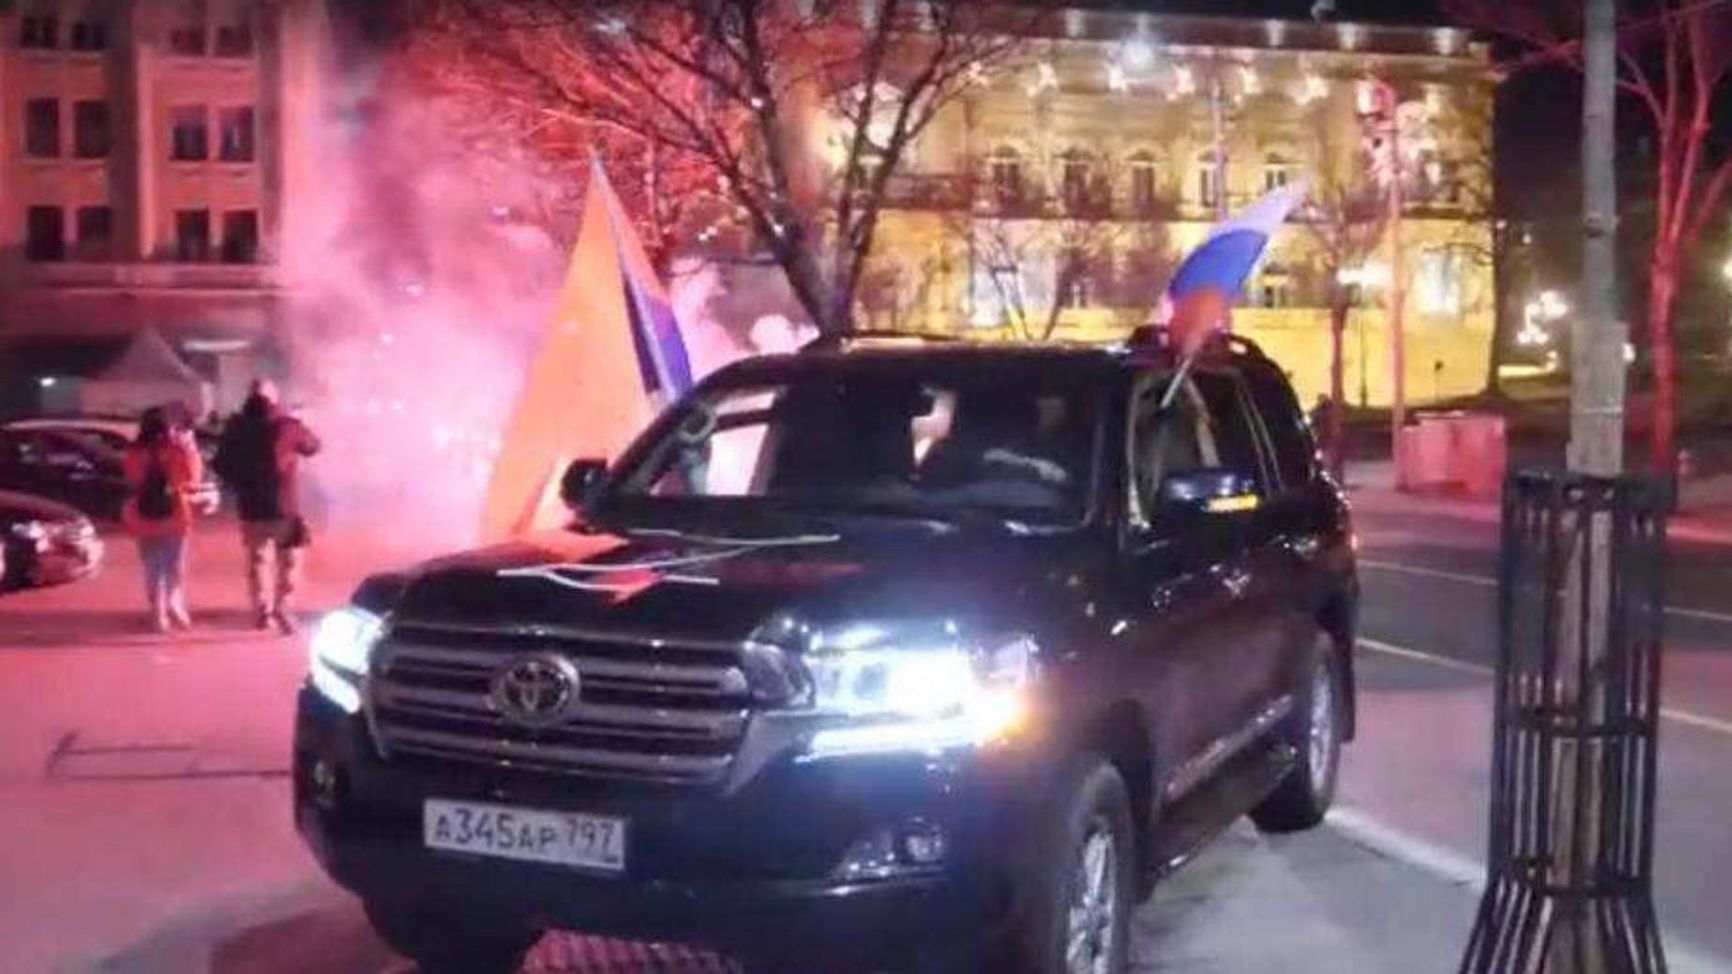 Miša Vacić brought signatures for his nomination in a car with Russian license plates and flag and the letter Z